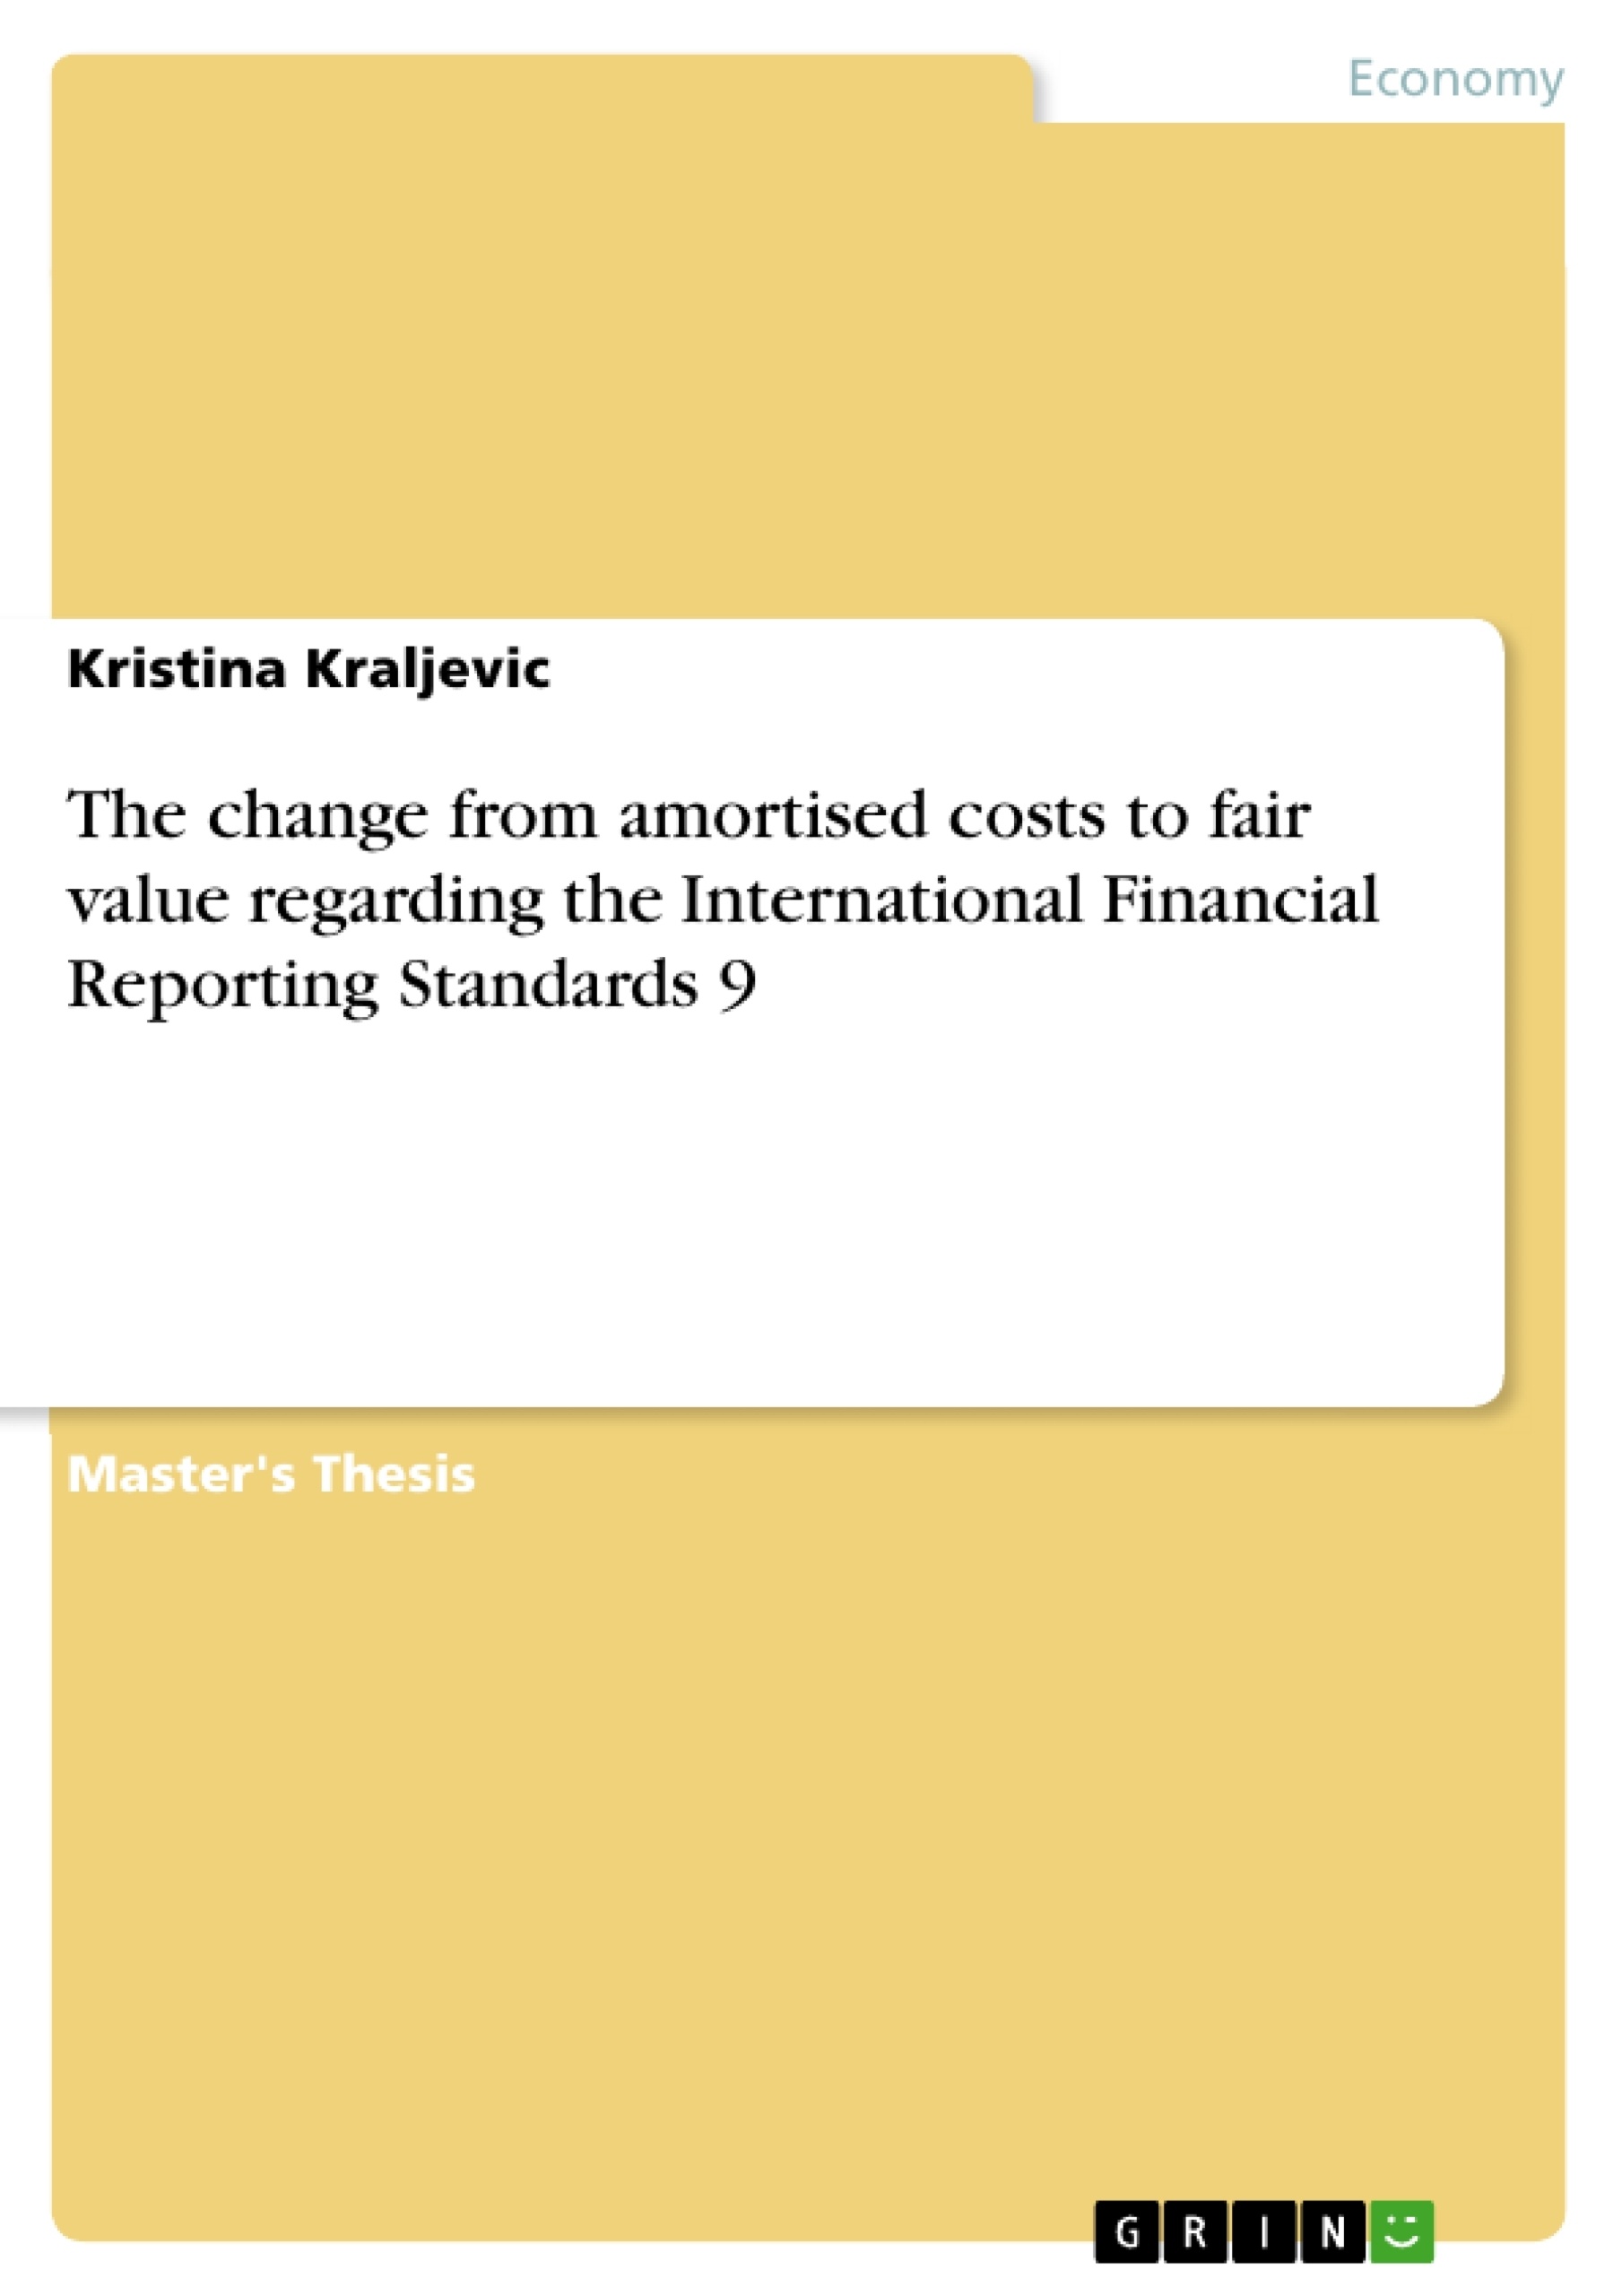 Titre: The change from amortised costs to fair value regarding the International Financial Reporting Standards 9